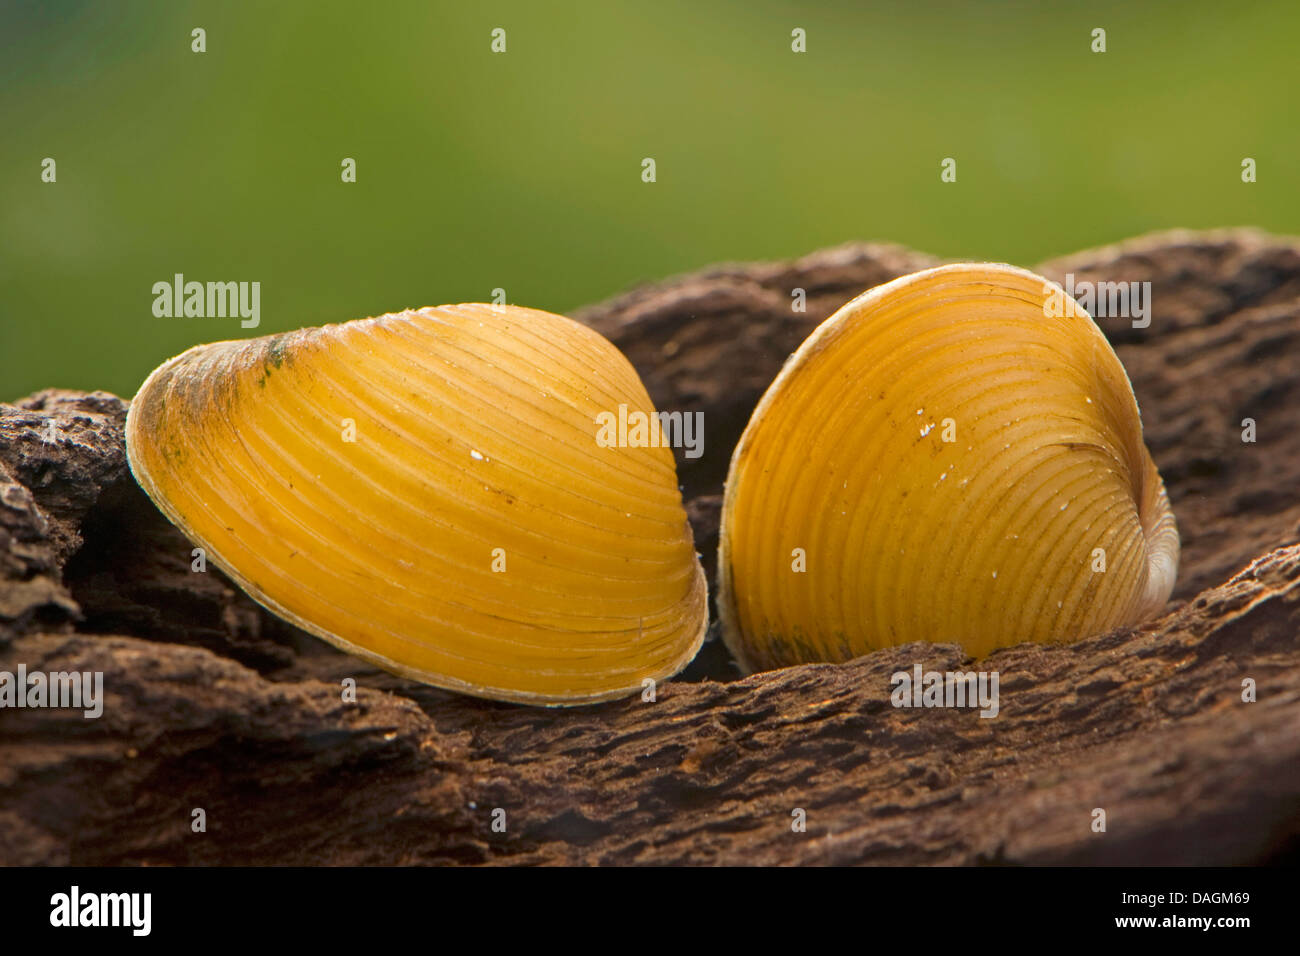 pond mussel, floater (Anodonta spec.), two pond mussels next to each other Stock Photo